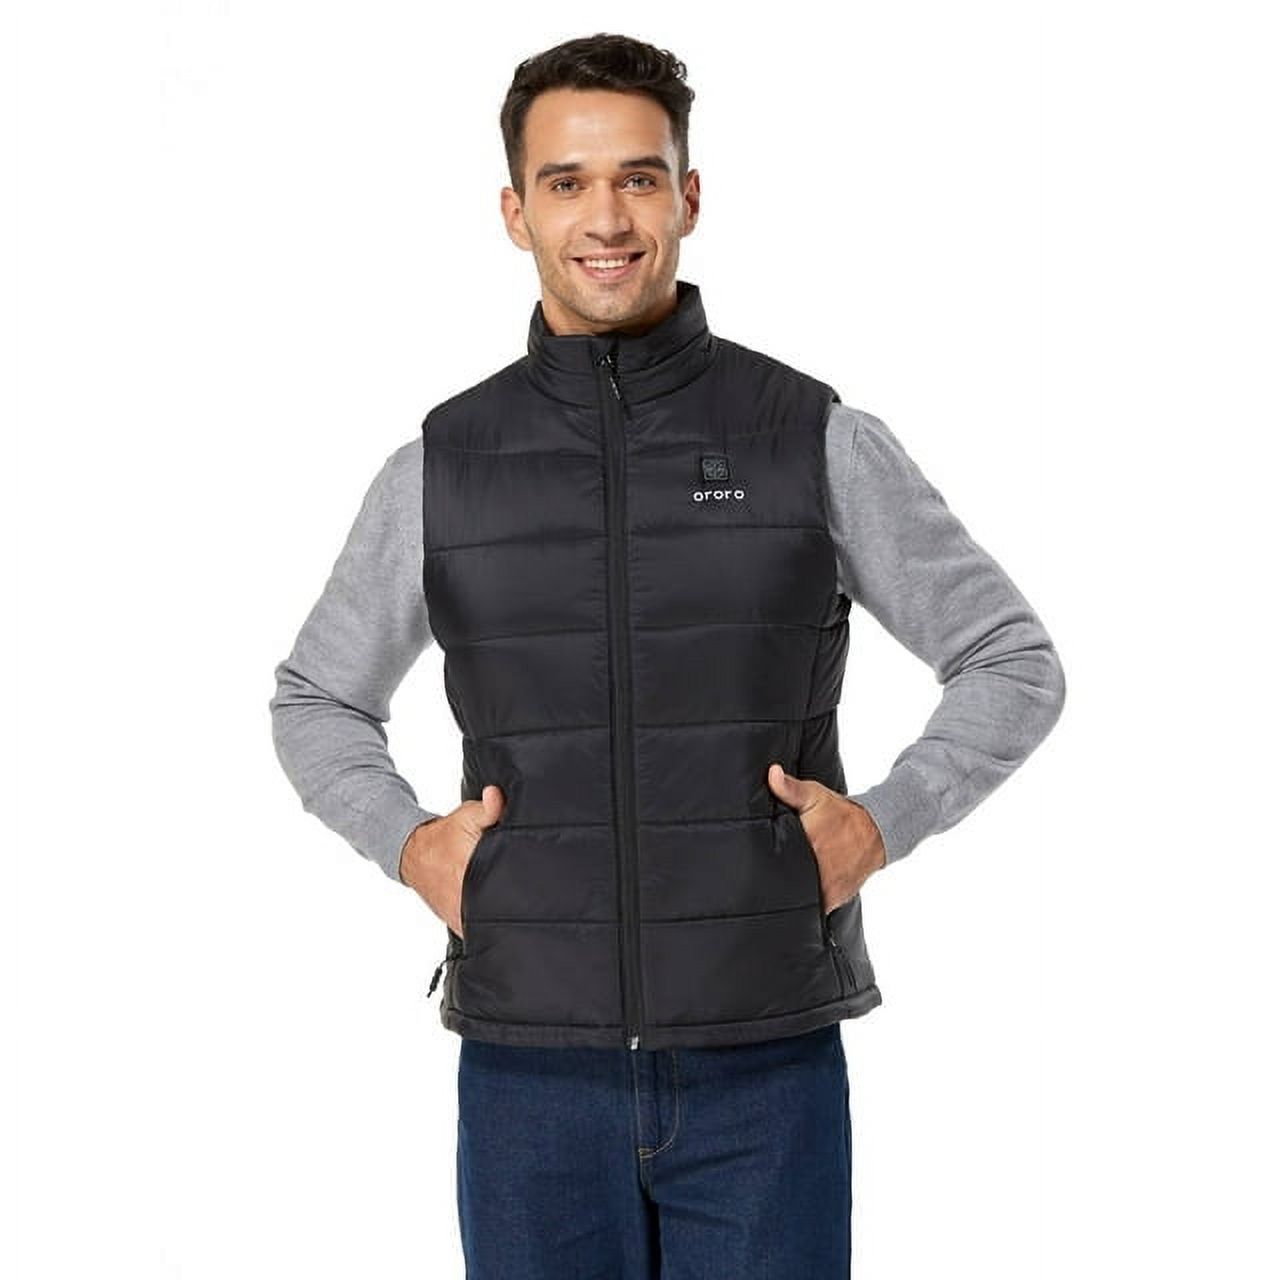 ORORO Men's Heated Vest with Battery, Heating Vest for Hiking Skiing Outdoors (Black, L) - image 4 of 12